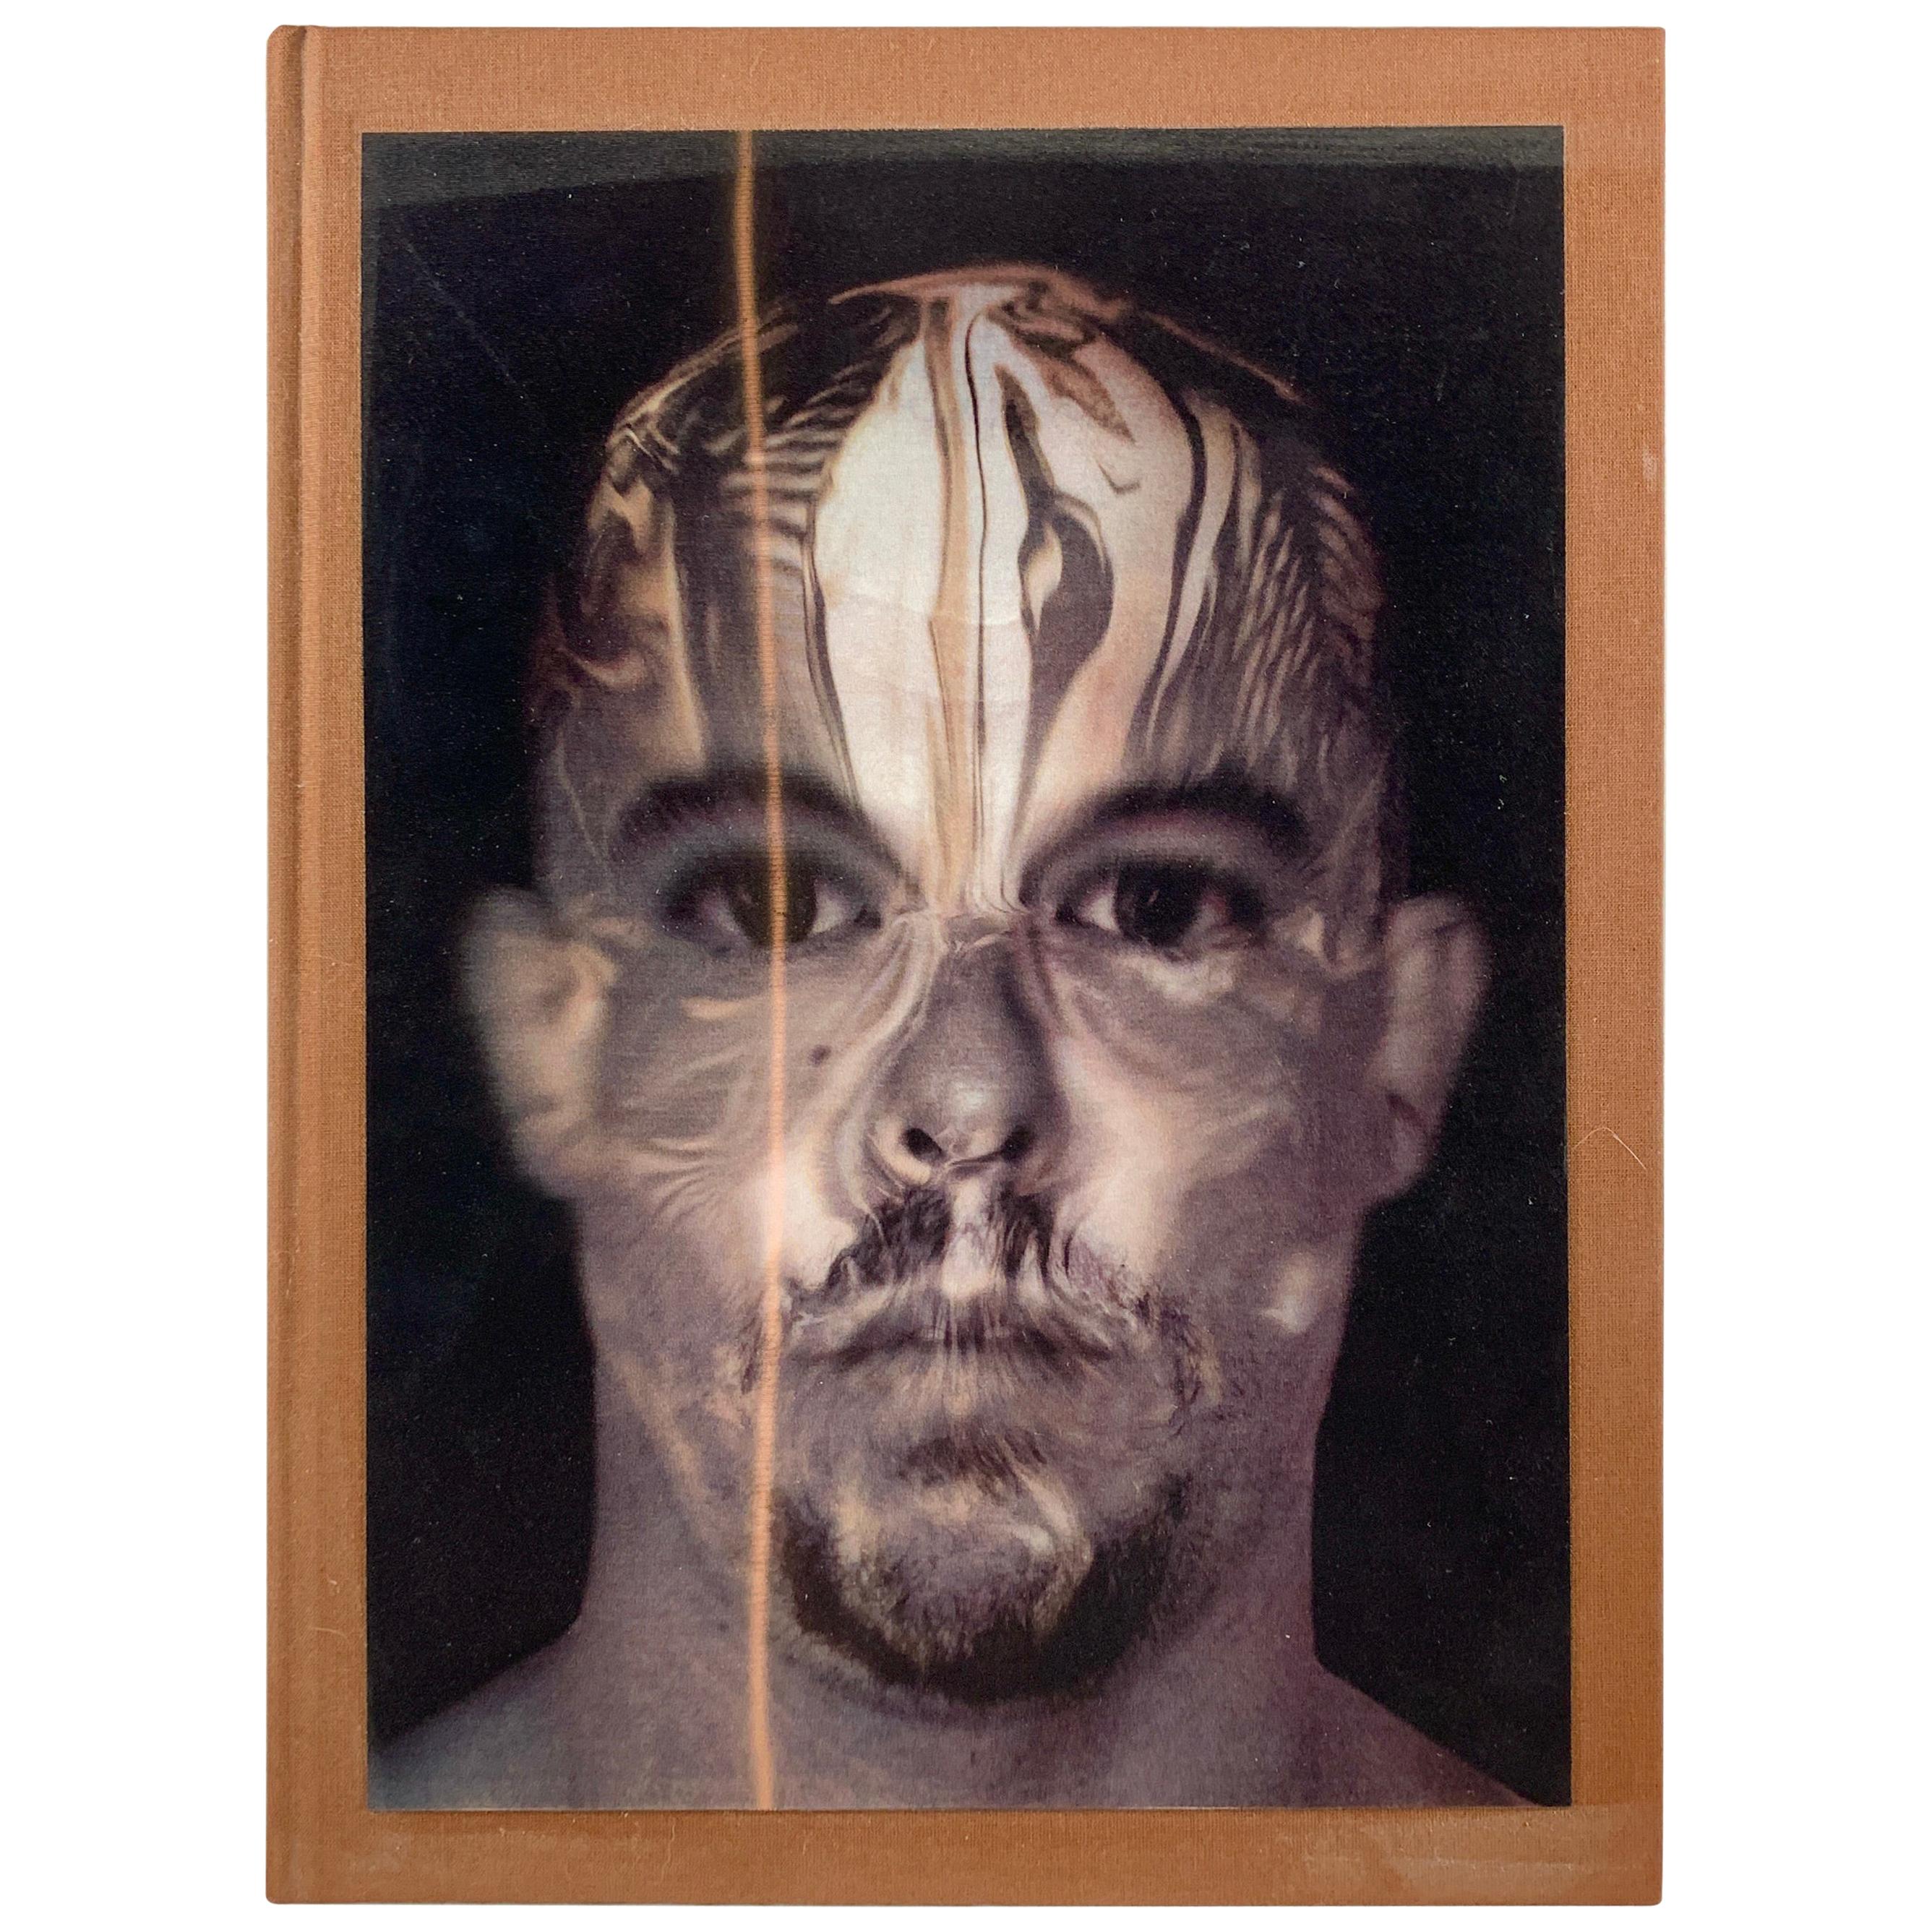 Alexander McQueen: Savage Beauty, Andrew Bolton MOMA Illustrated Hardcover Book